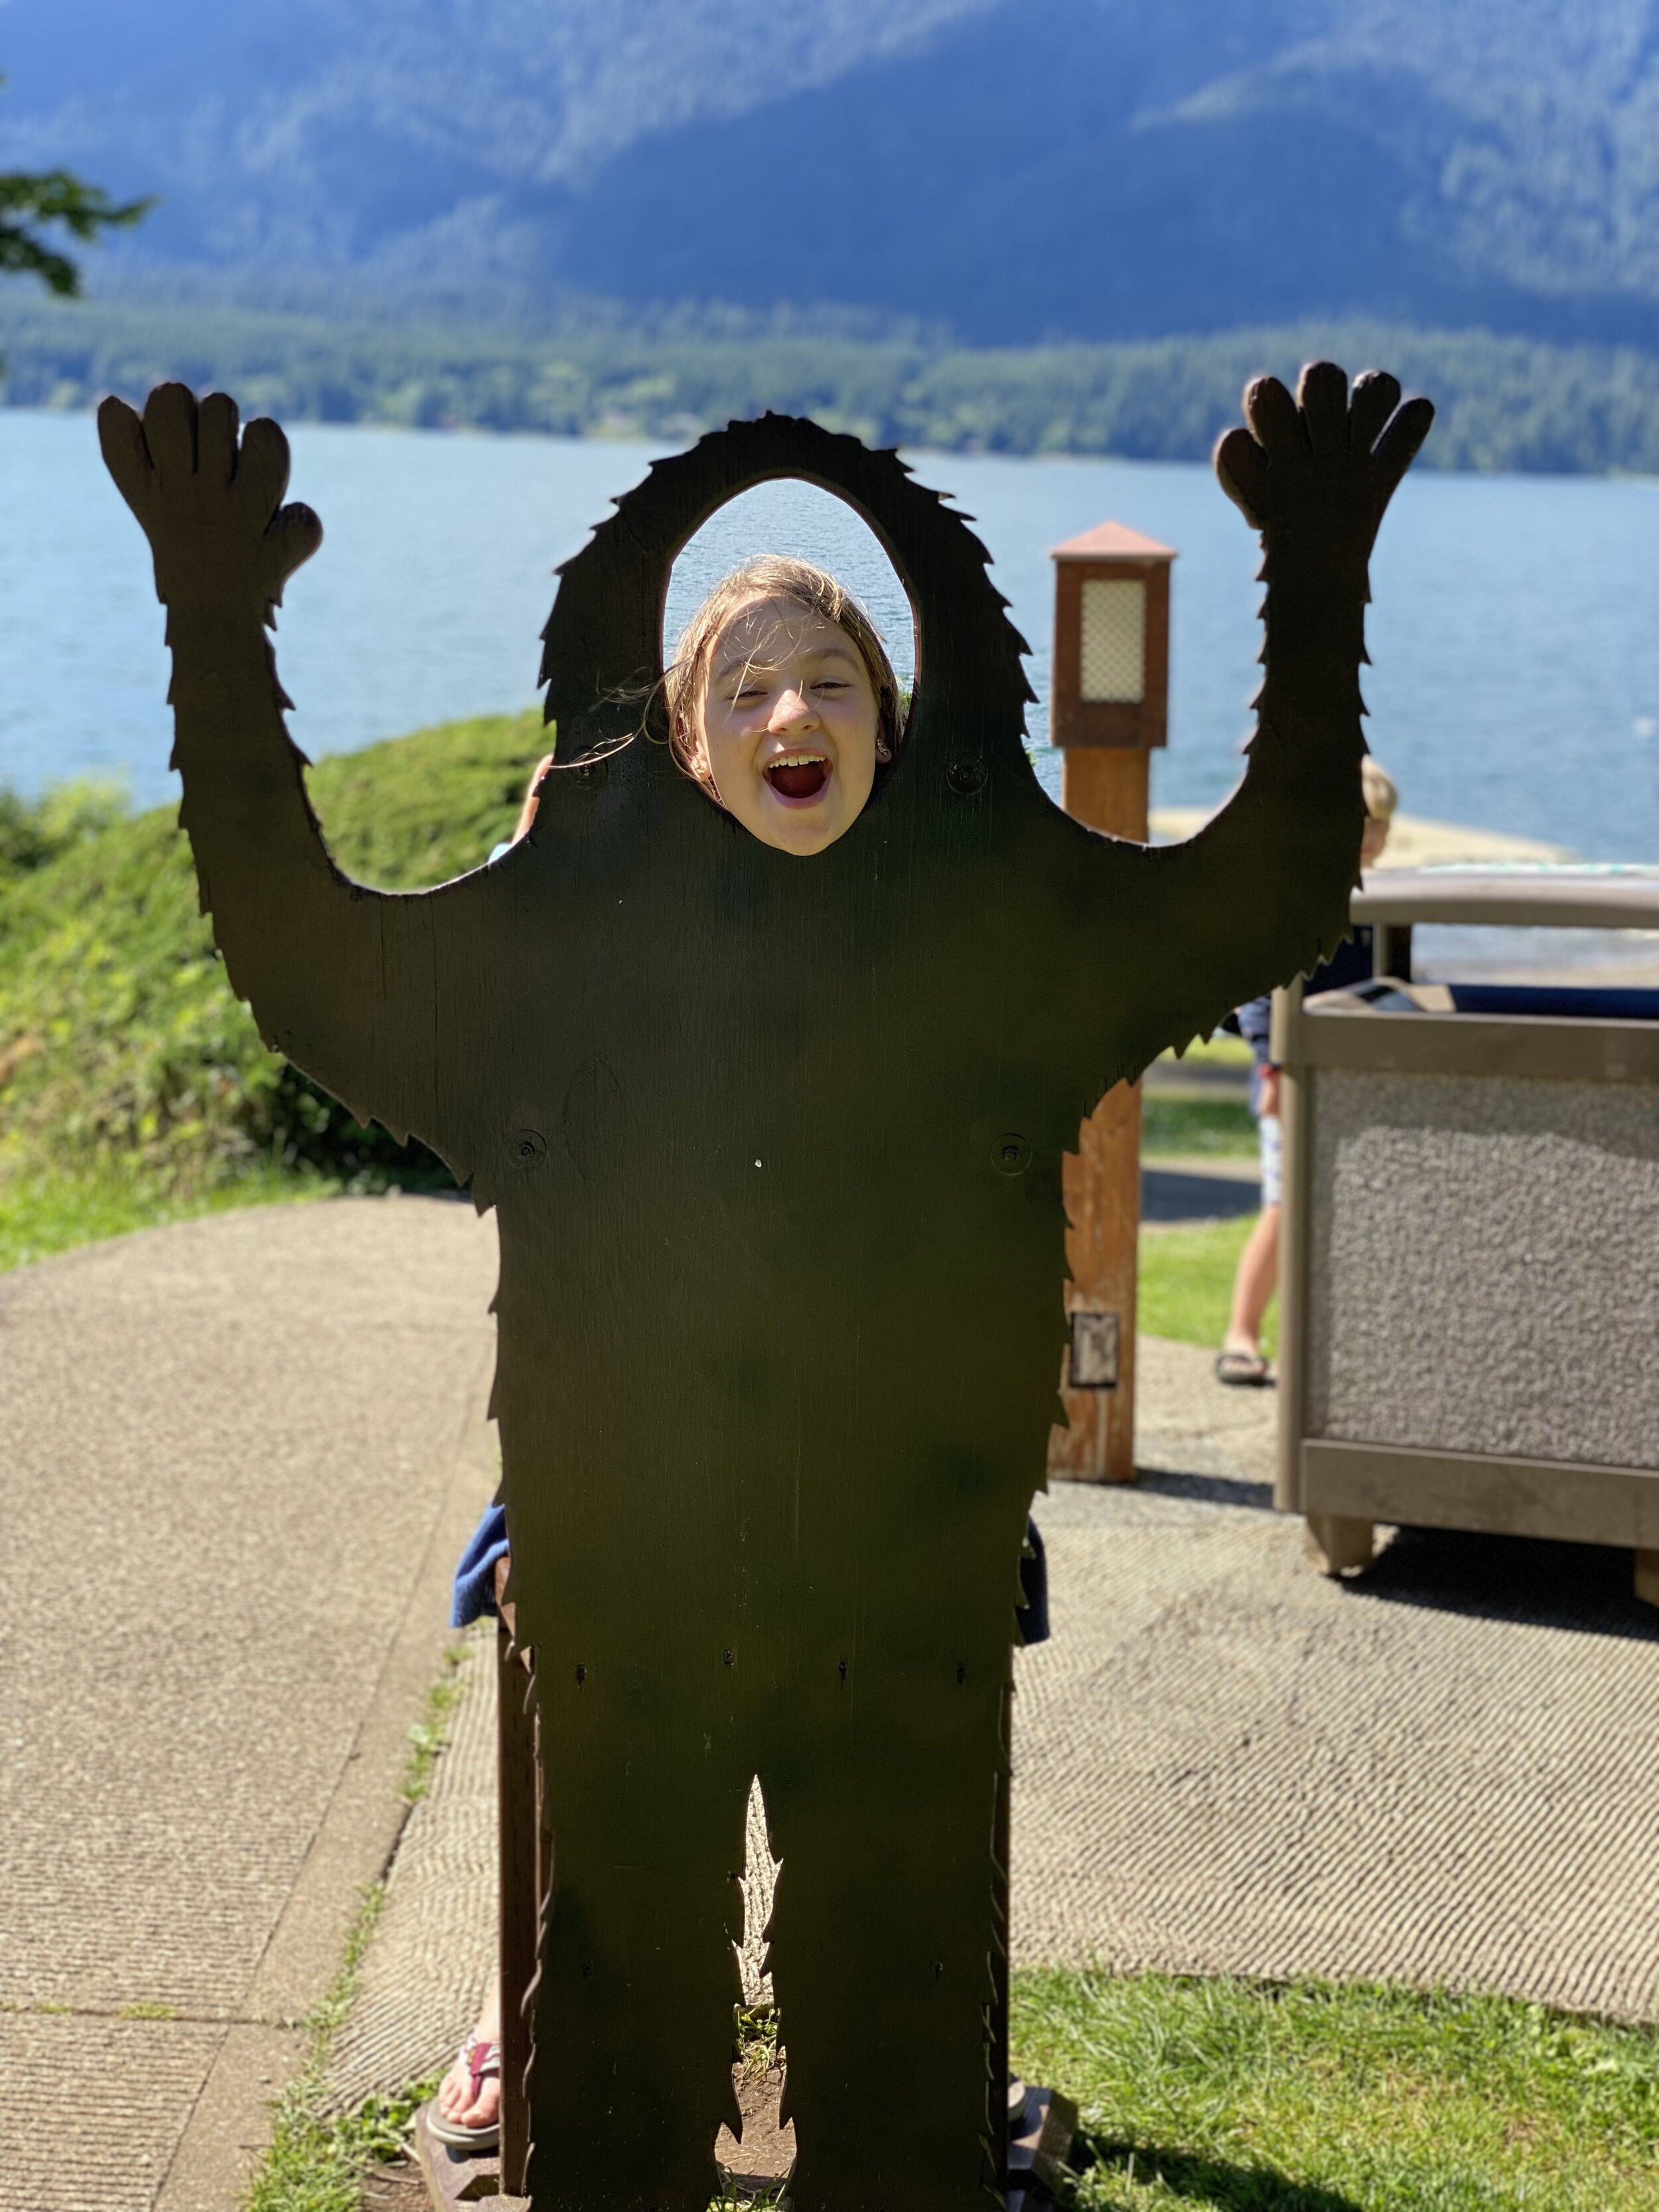 Our little yeti at Lake Quinault Lodge